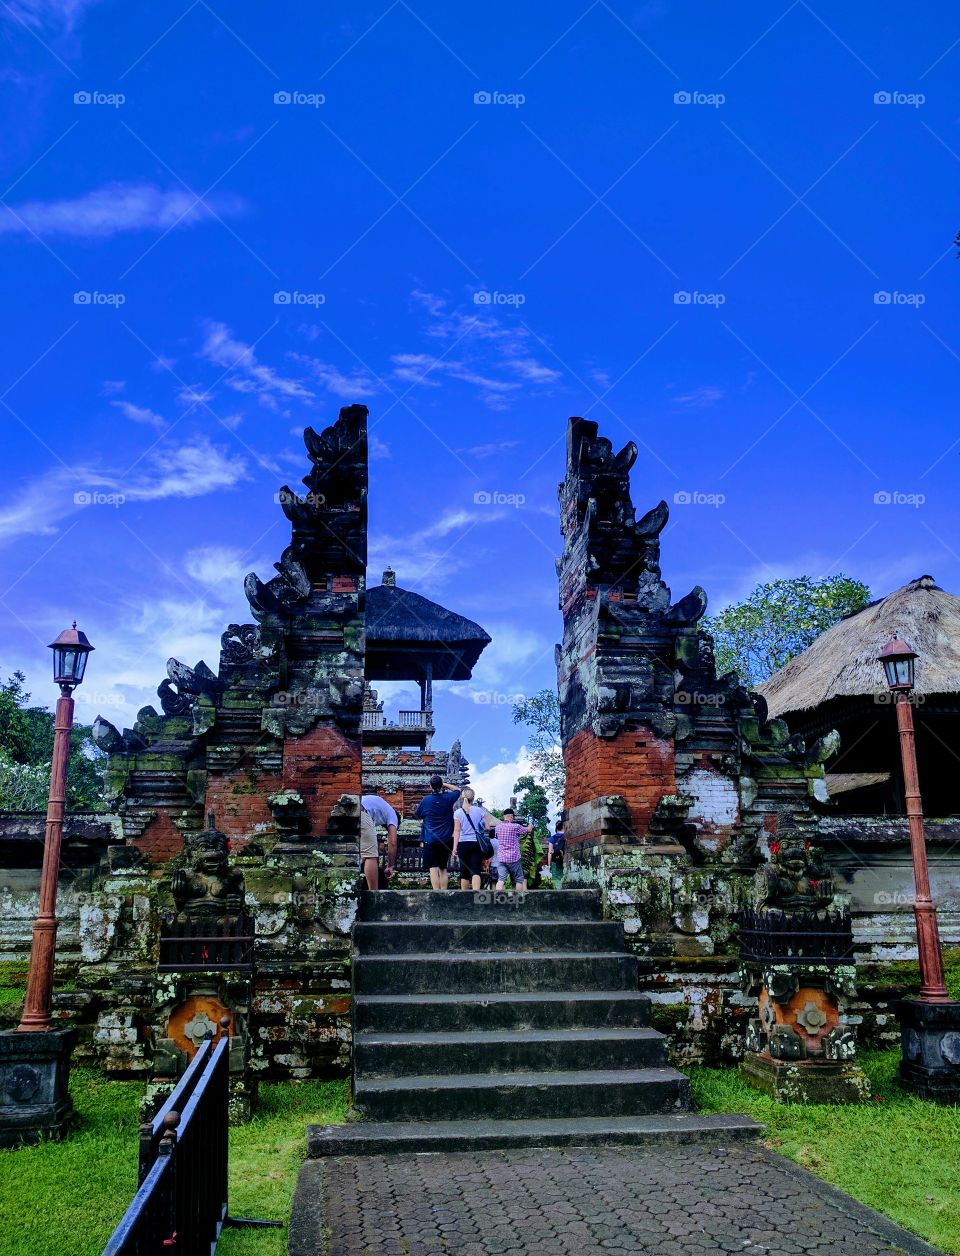 The Gate - Balinese Hinduism